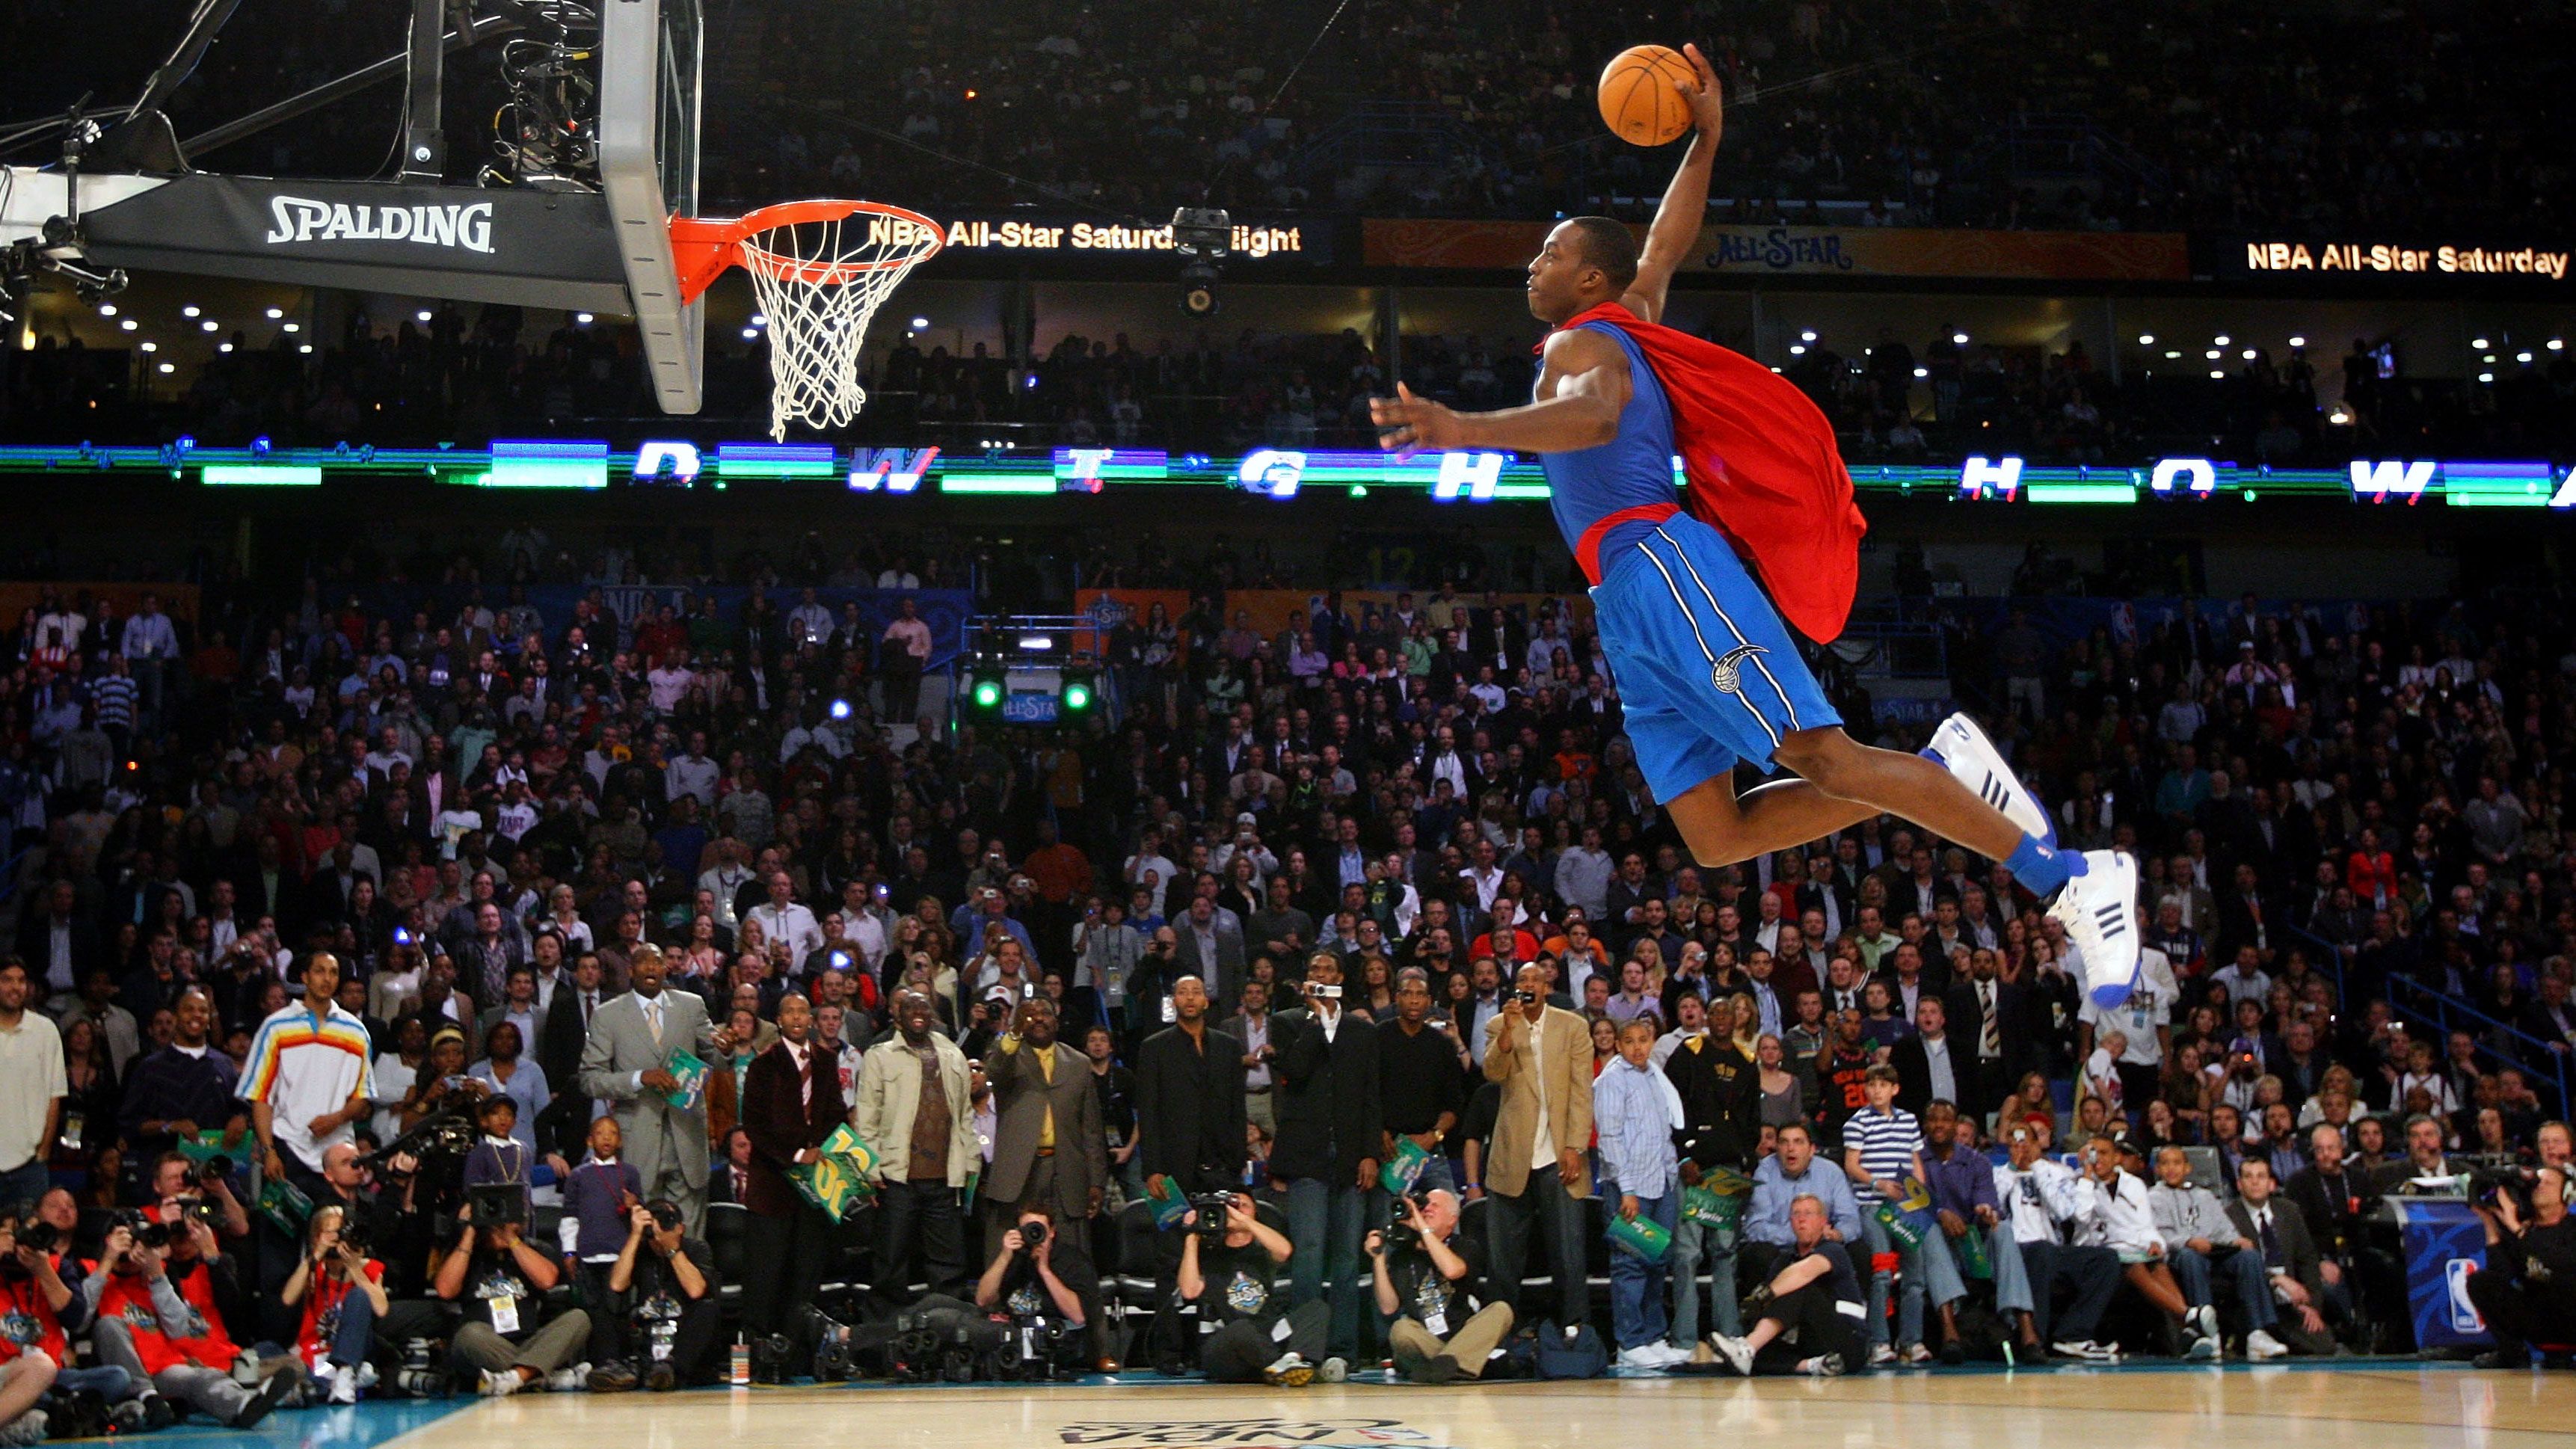 nate robinson dunking over dwight howard wallpaper